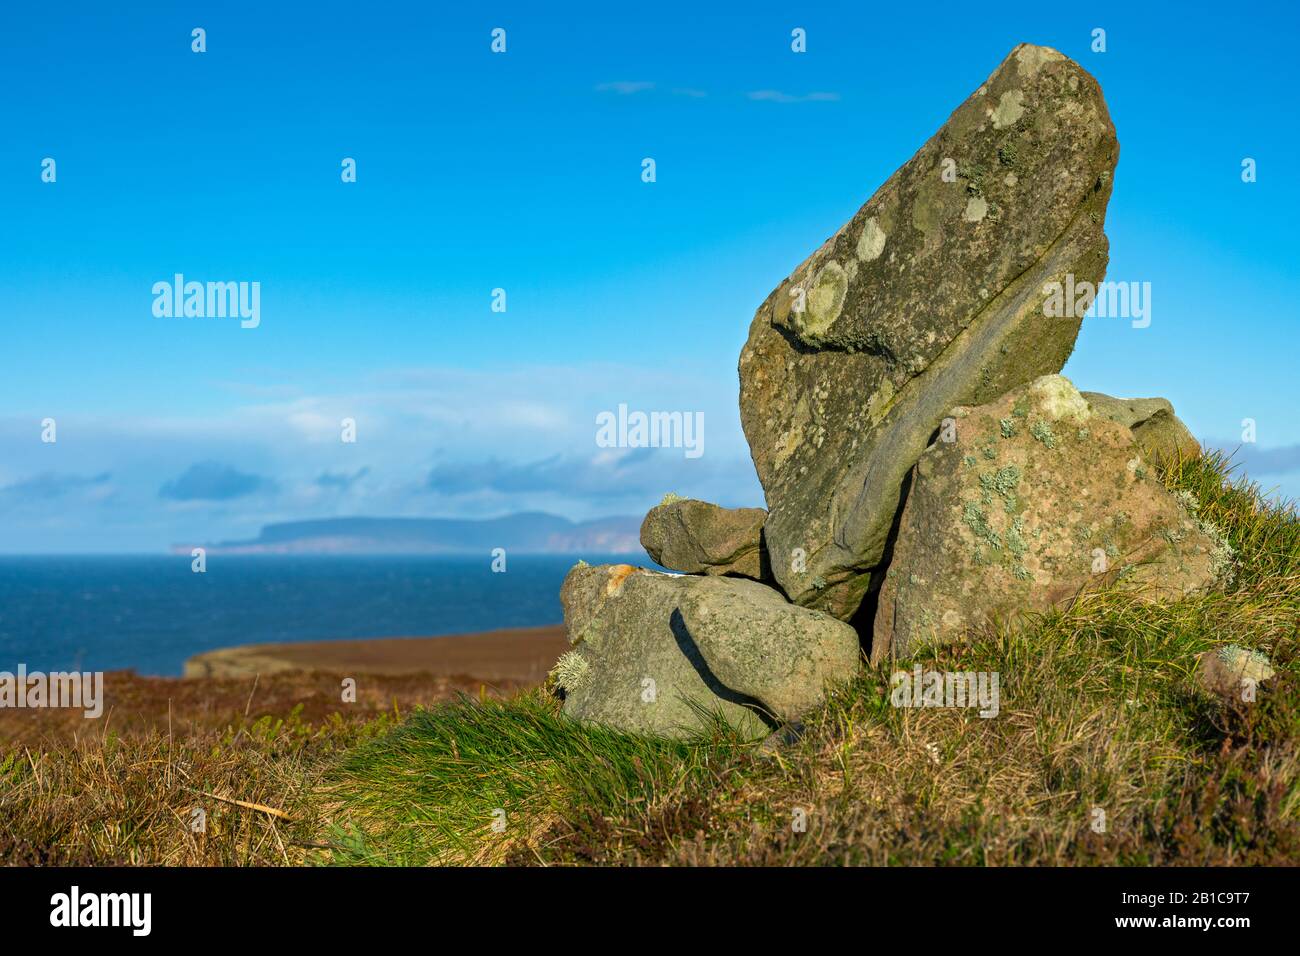 The island of Hoy, Orkney, from Ashygeo Hillock, near the coastal path on the west side of Dunnet Head, Caithness, Scotland, UK Stock Photo